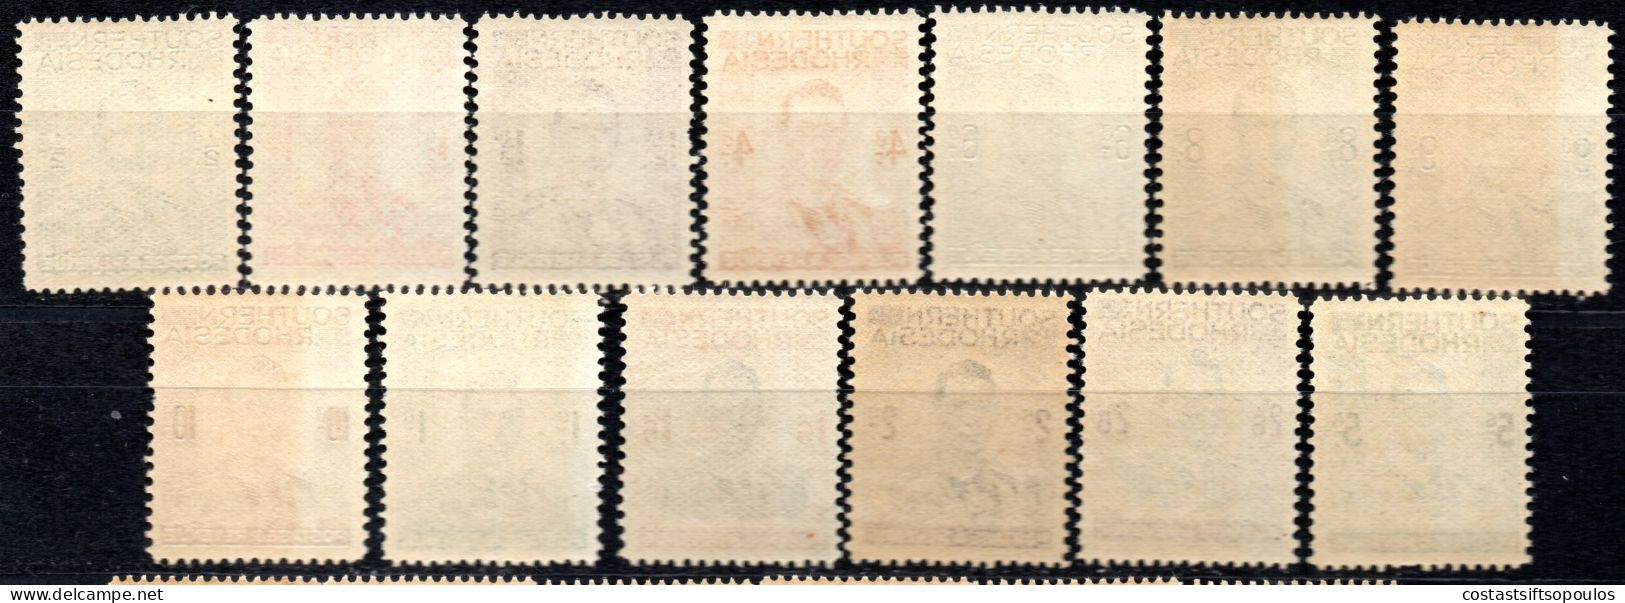 2313. SOUTHERN RHODESIA 1937 SG. 40-52 MNH. VERY LIGHT PERF. AND GUM FAULTS,SEE SCANS - Southern Rhodesia (...-1964)